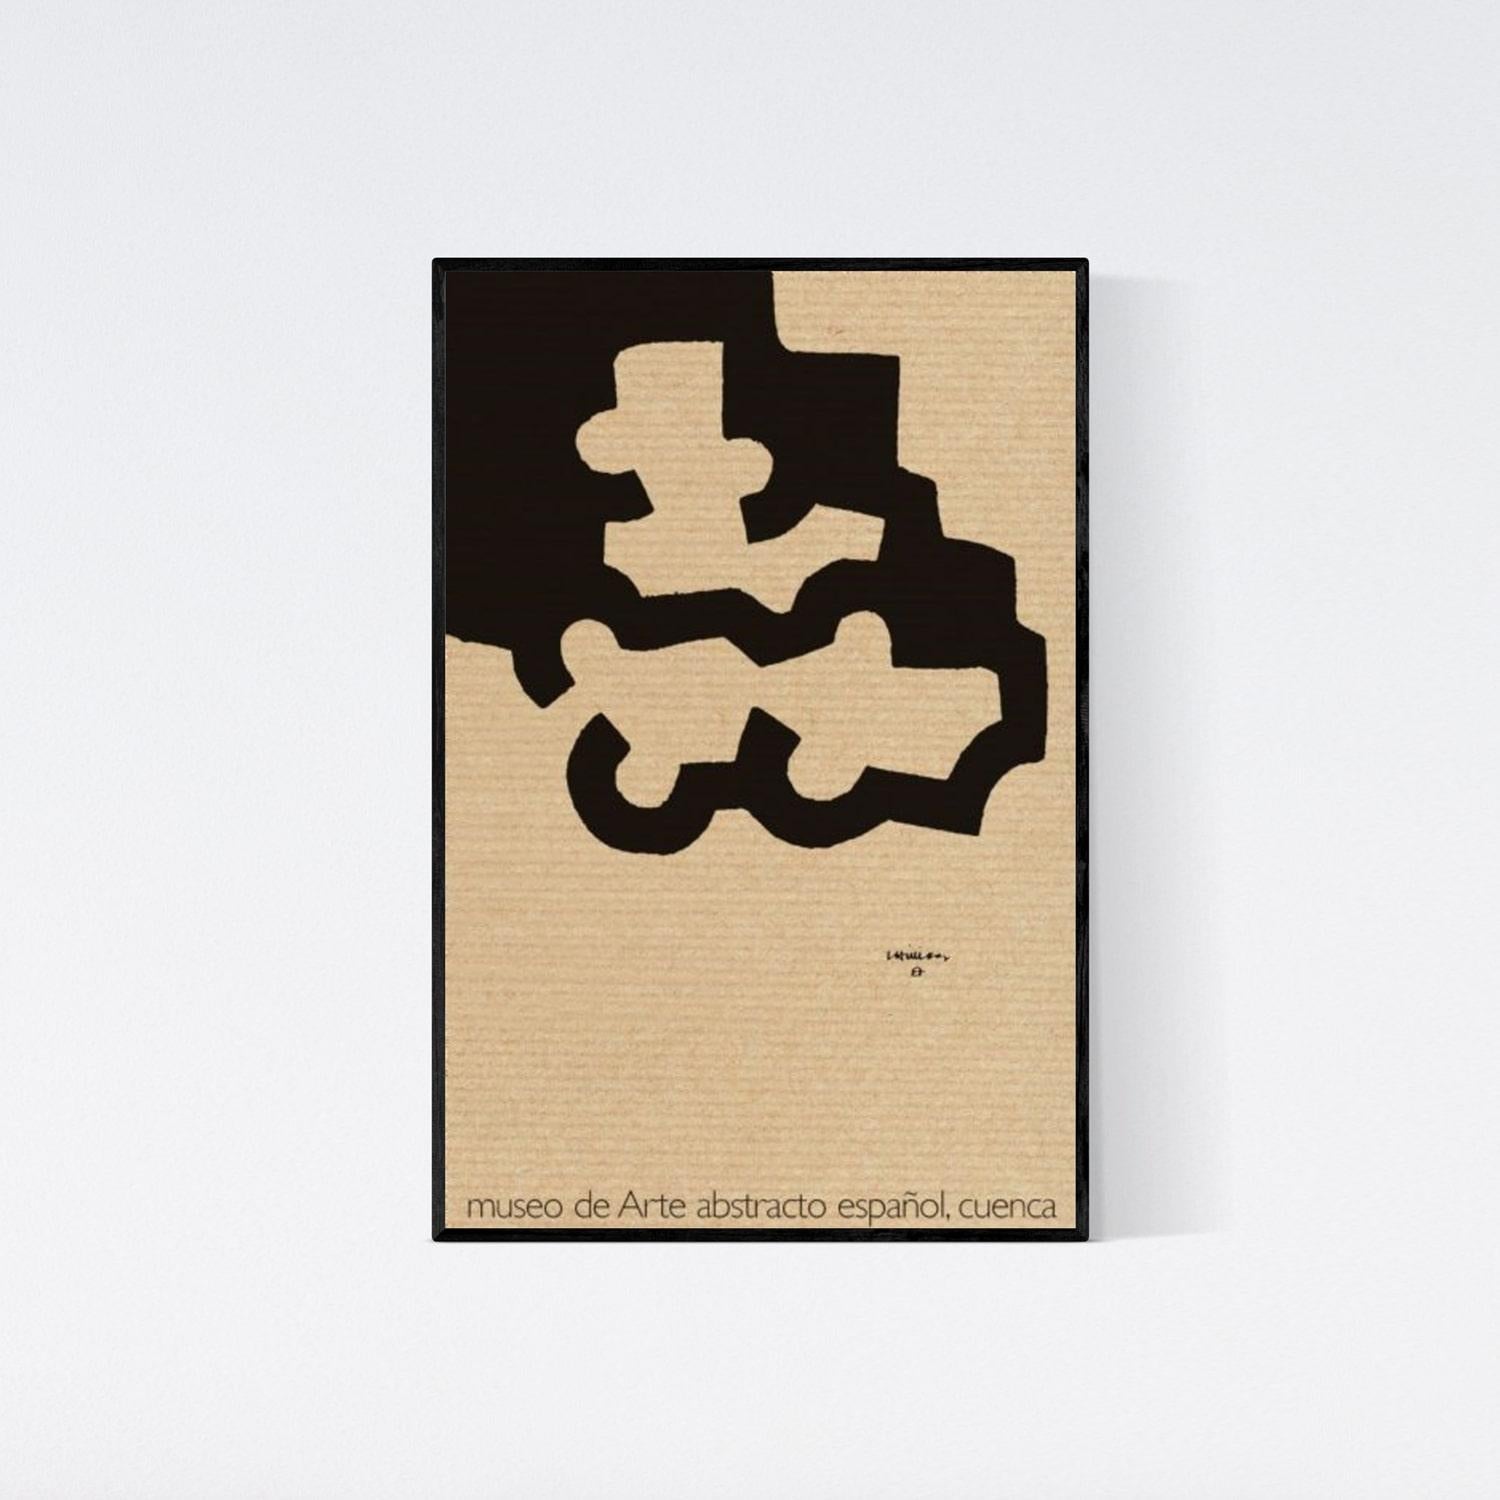 A lithographic poster published by The Museo de Arte Abstracto Español in Cuenca, Spain. First print run.
Features an artwork by Eduardo Chillida.

Condition: A-, near mint. Very light signs of age and handling.
Poster is sold unframed. Ship rolled